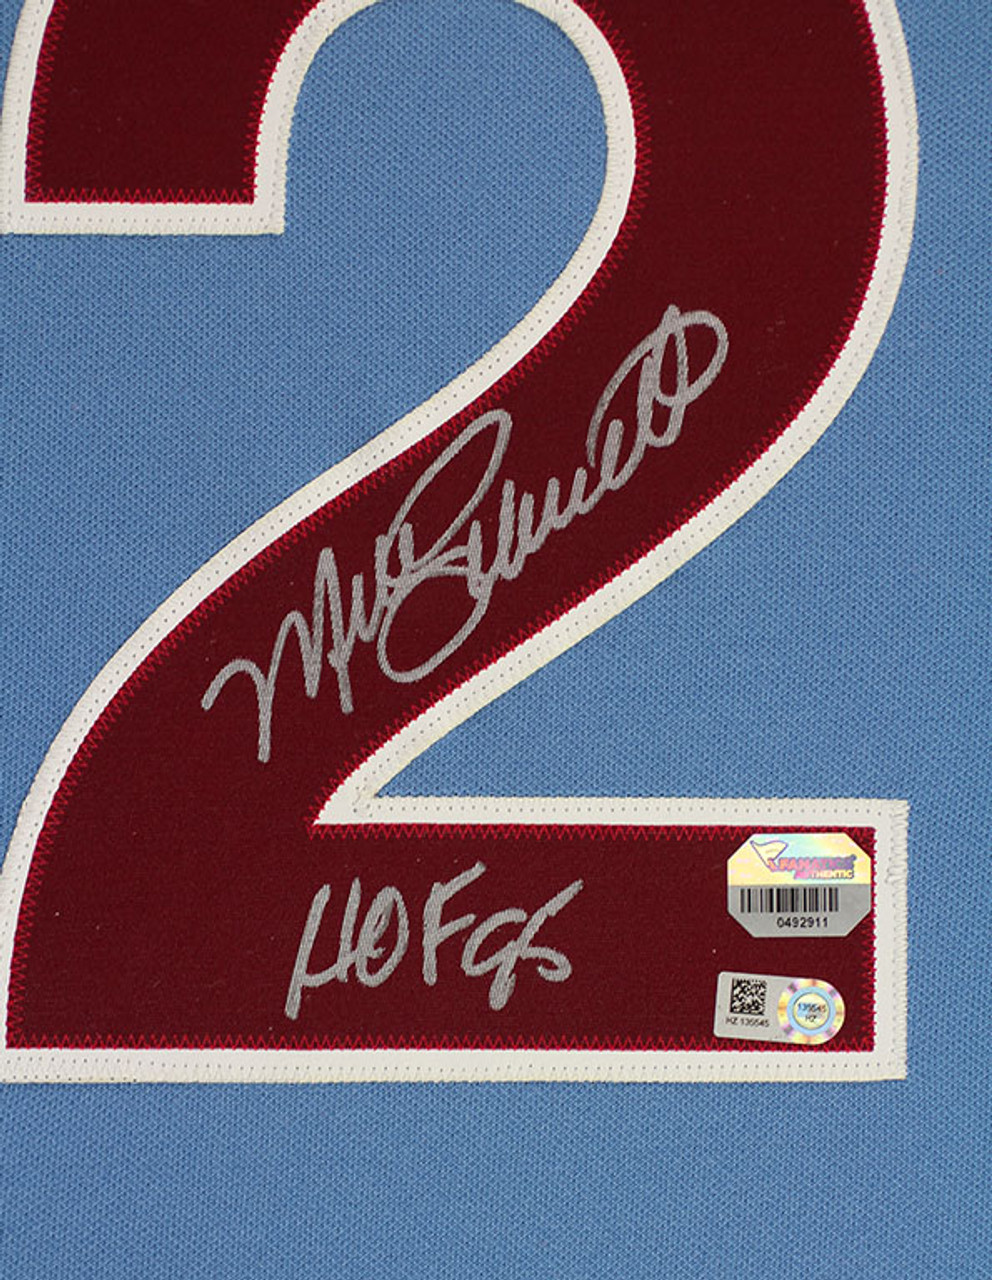 Mike Schmidt Autographed and Framed Blue Phillies Jersey